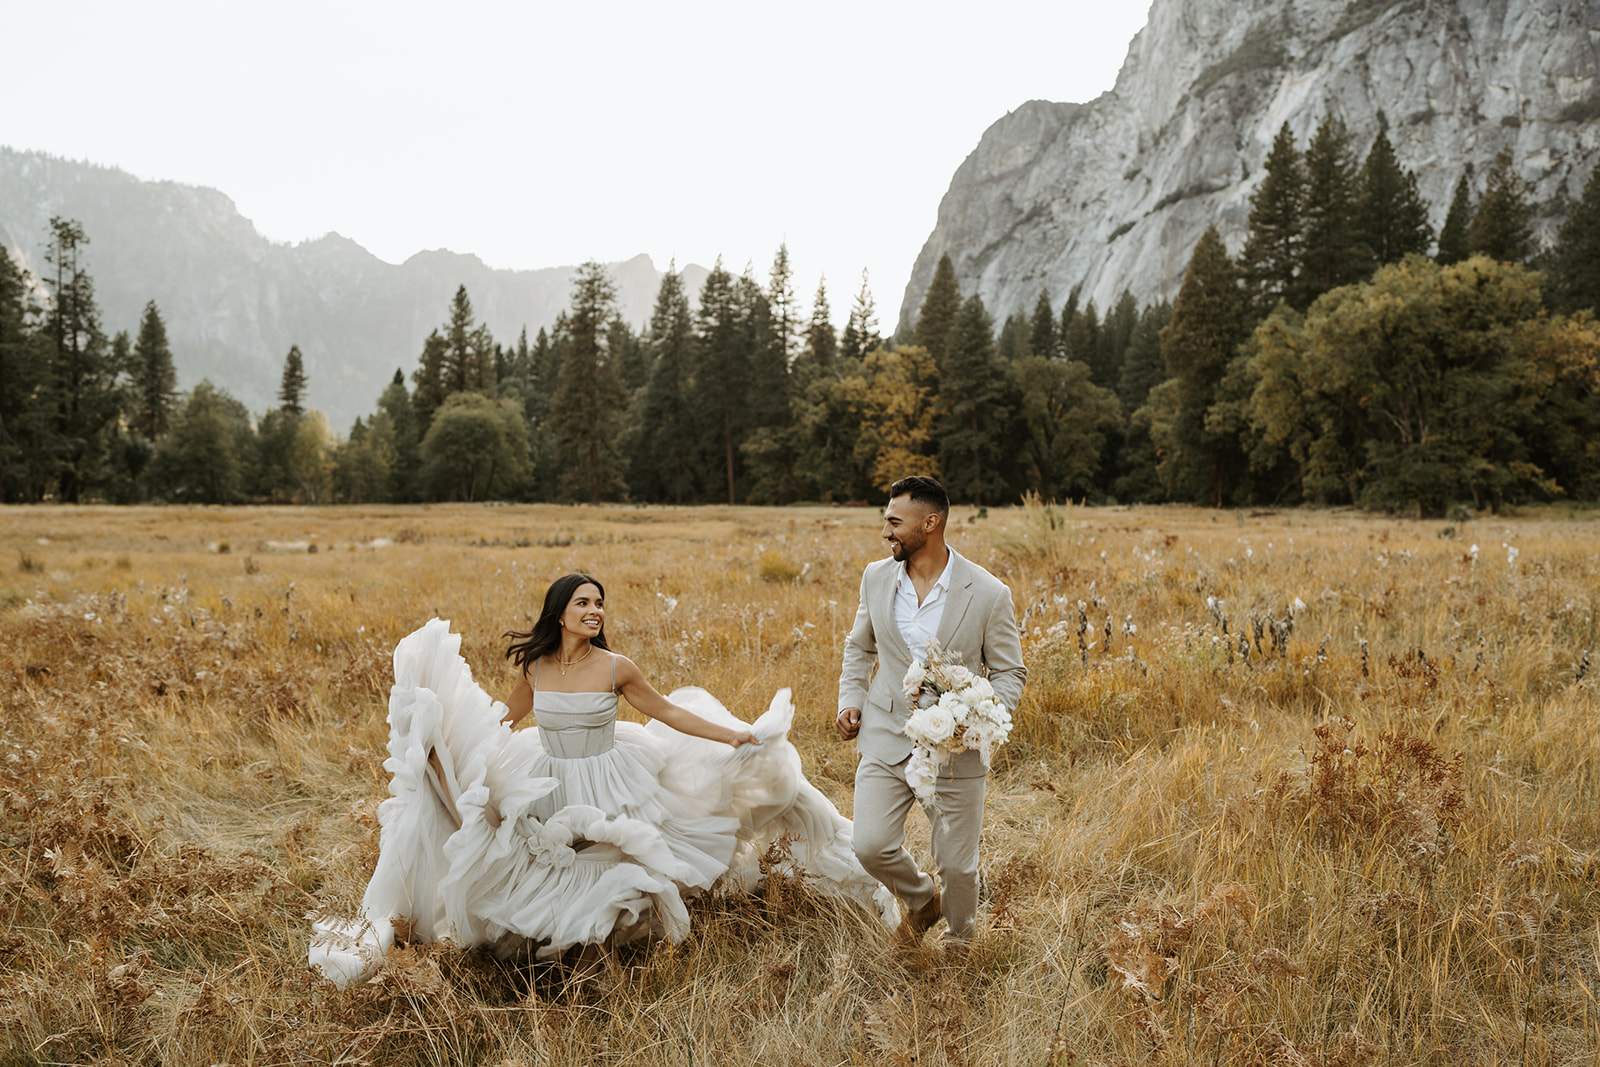 get married in a national park Yosemite